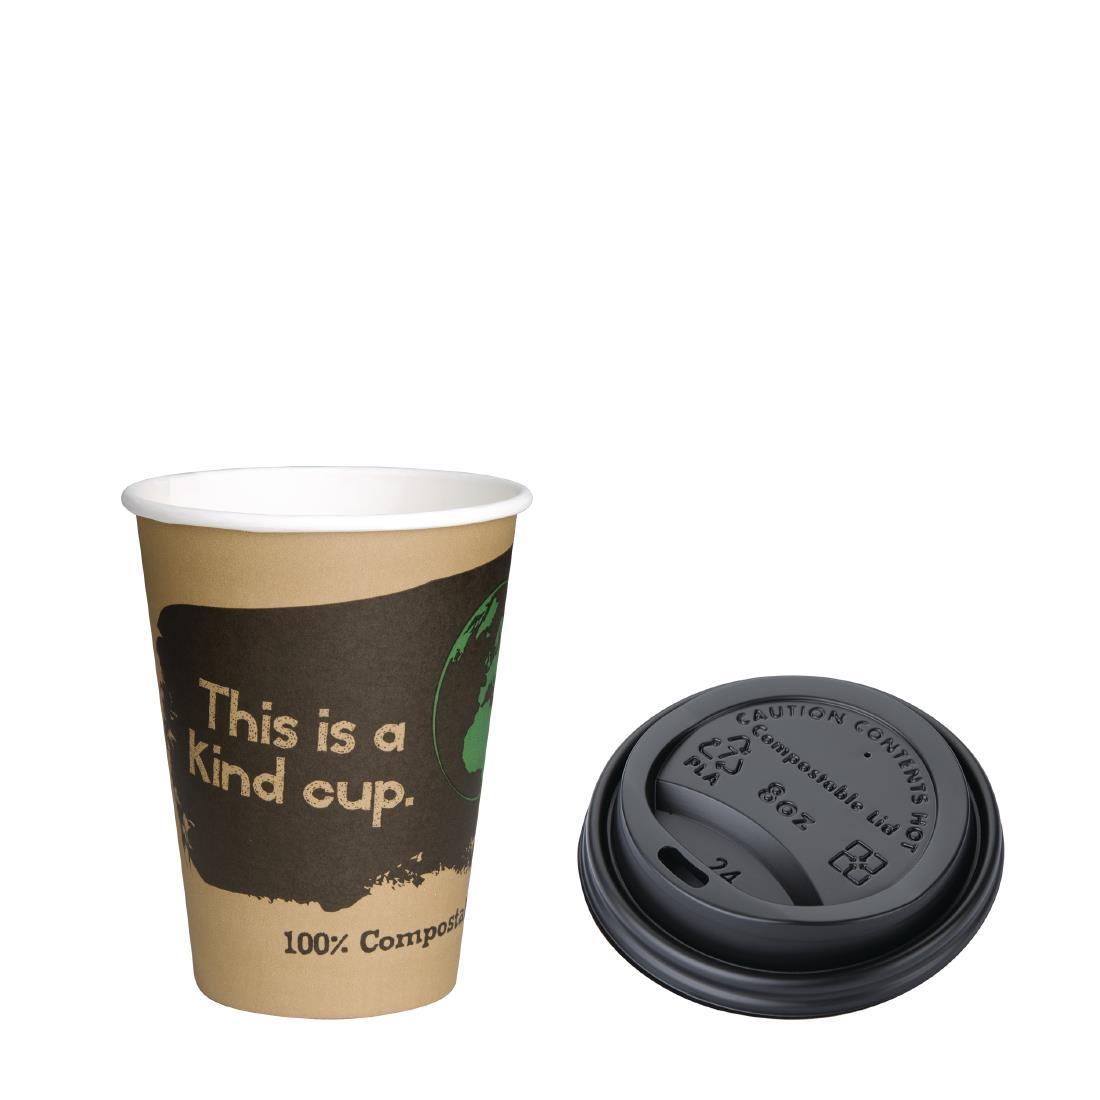 Fiesta Green 8oz Compostable Hot Cups and Lids Bundle (Pack of 1000) - SA484  - 1